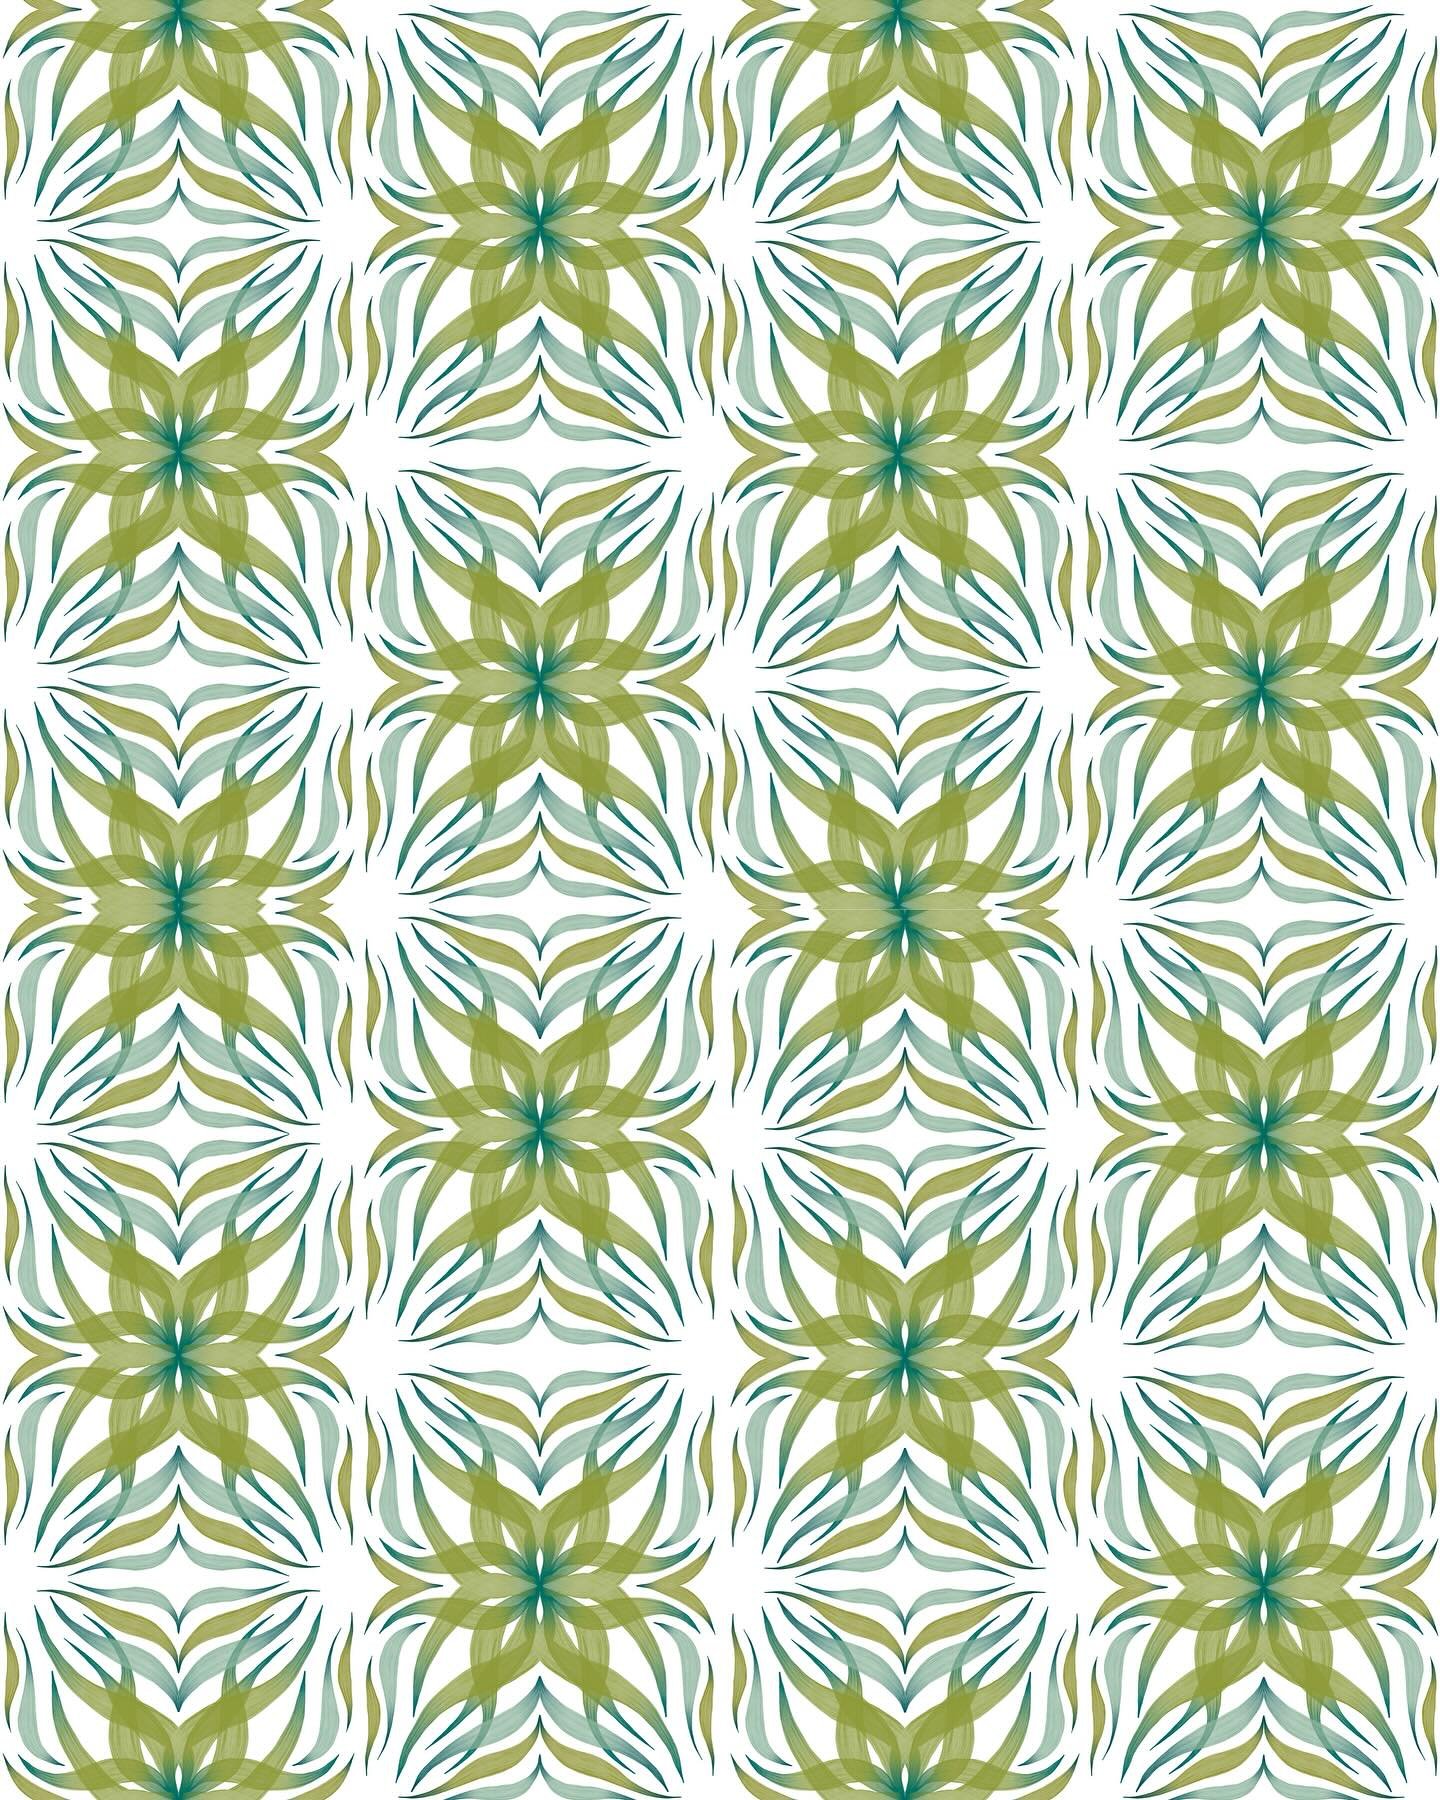 Hope you&rsquo;re having fun this weekend!

Playing around with a rectangular mandala half drop repeat pattern in Procreate. I left the paper texture off this time, but I think the gouache brush texture still comes through. This is the DuoColor Brist